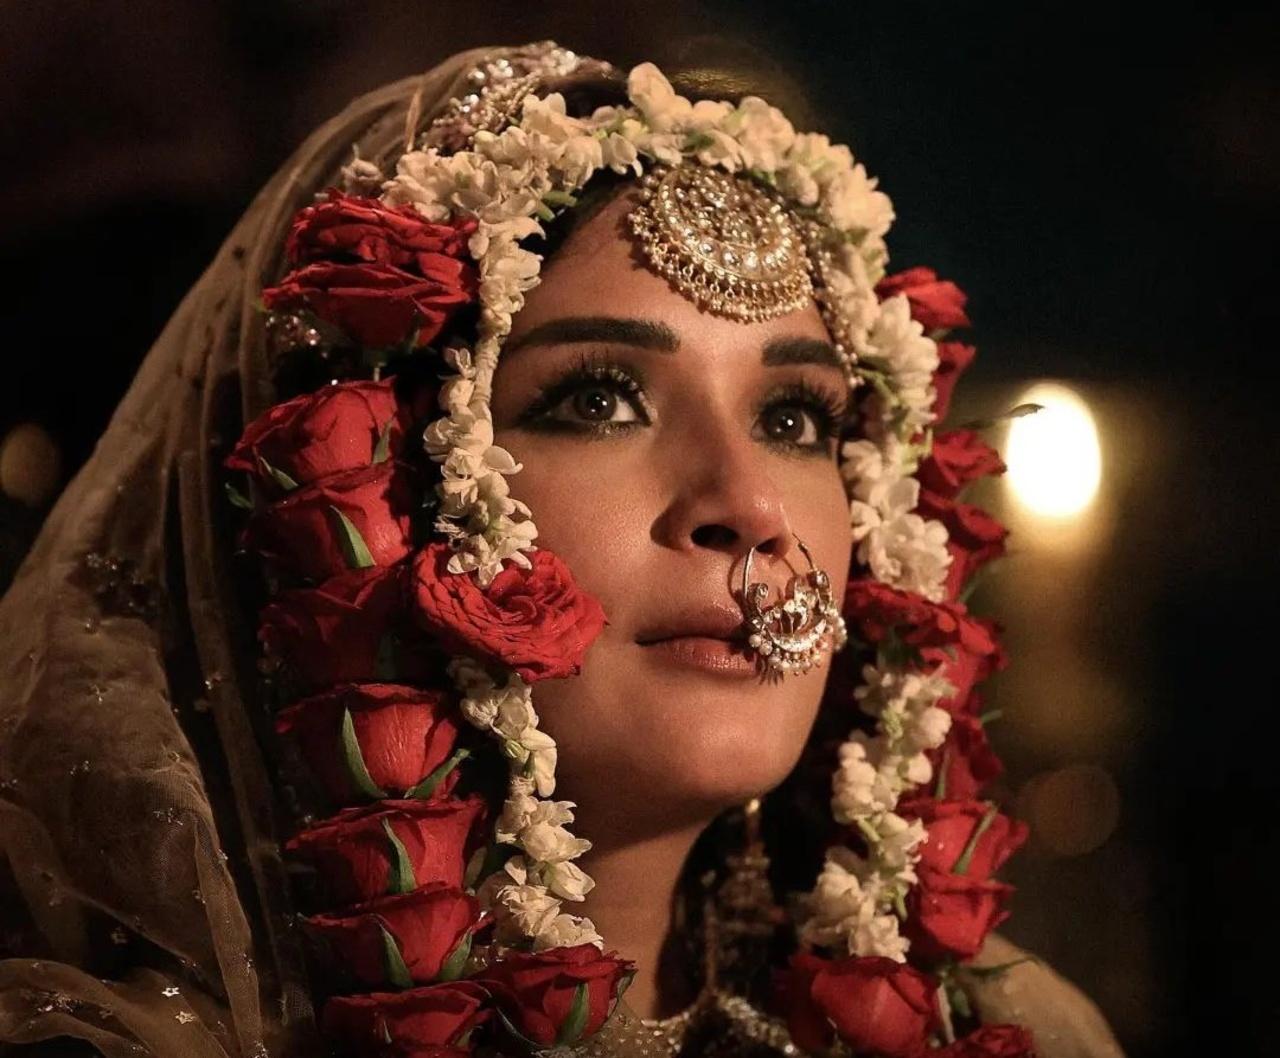 Richa Chadha plays Lajjo, whose resilience echoes in the halls of Shahi Mahal.